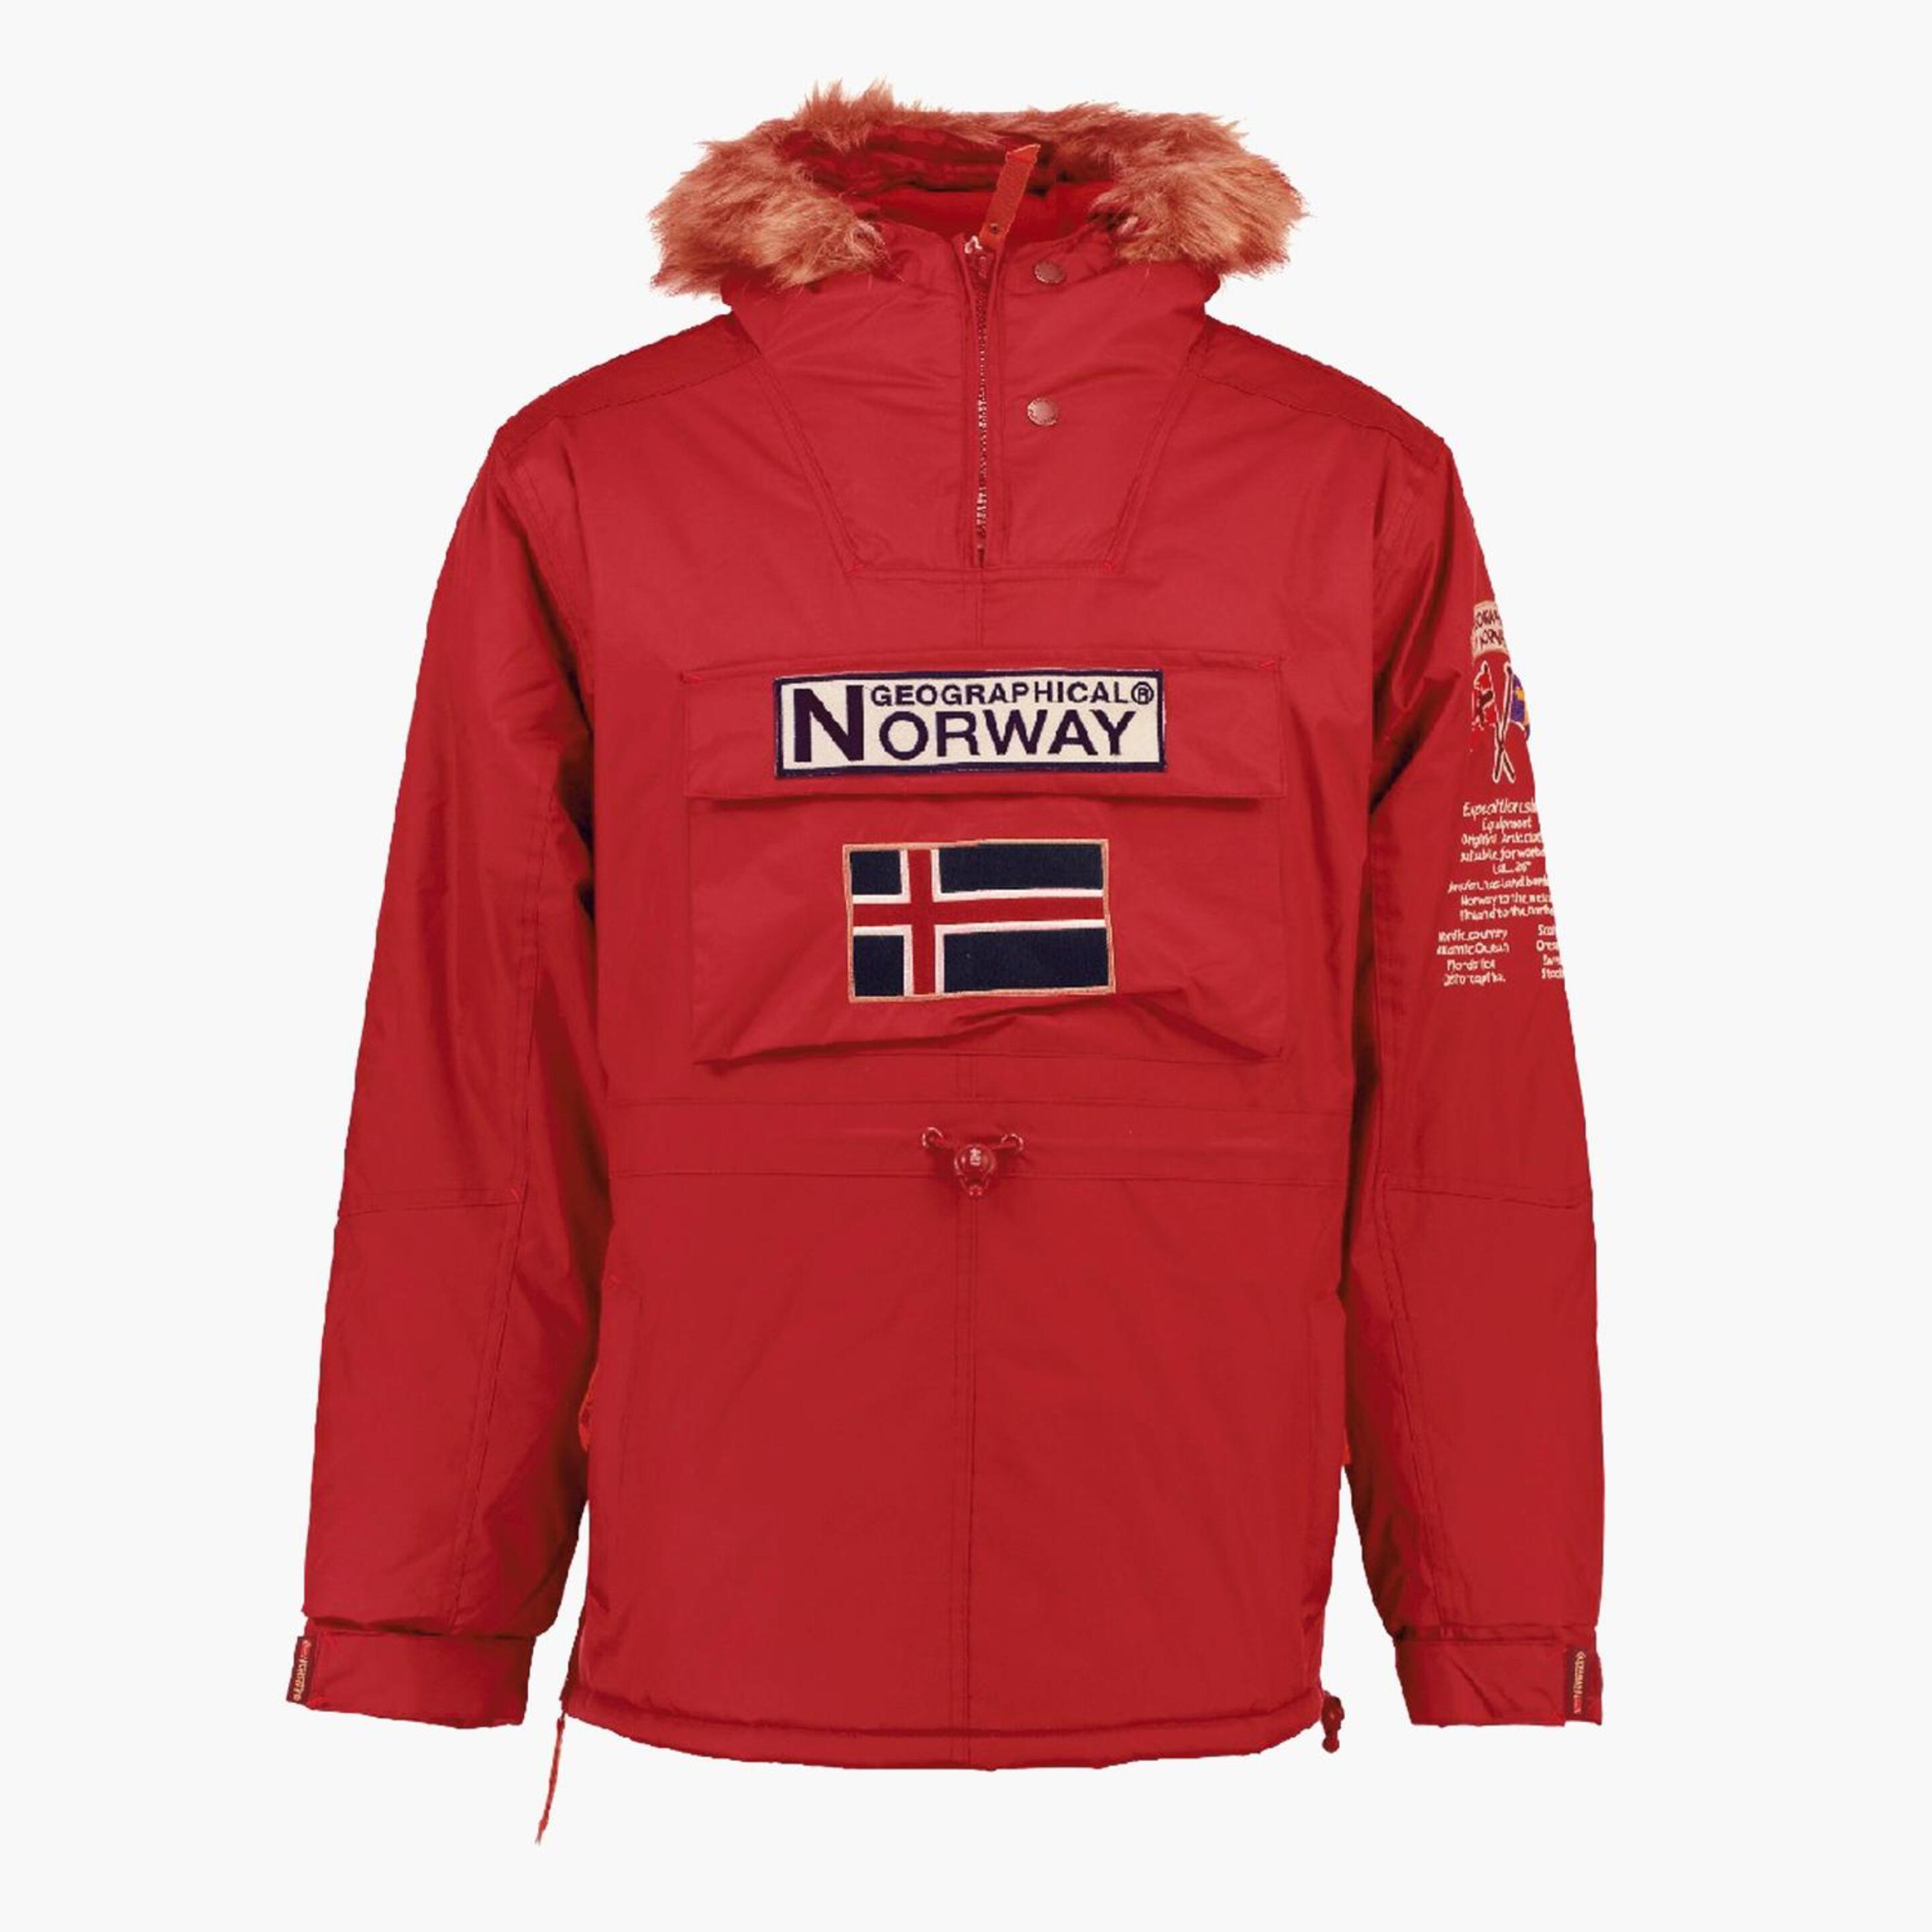 Geographical Norway Boomerang